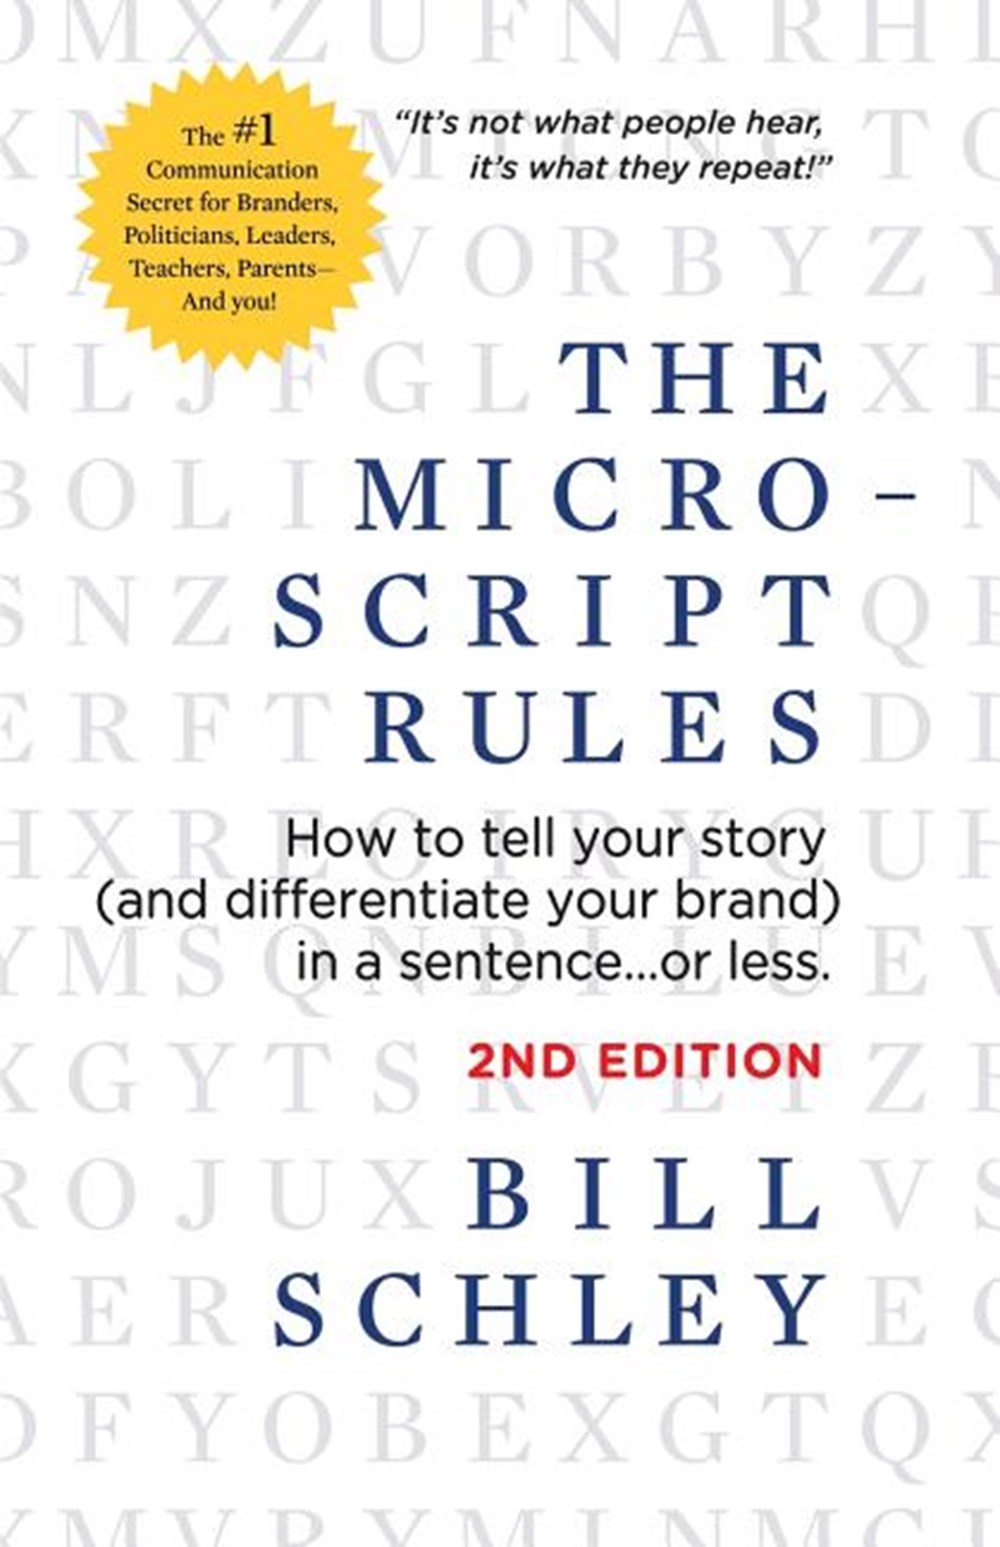 Micro-Script Rules: How to tell your story (and differentiate your brand) in a sentence...or less.